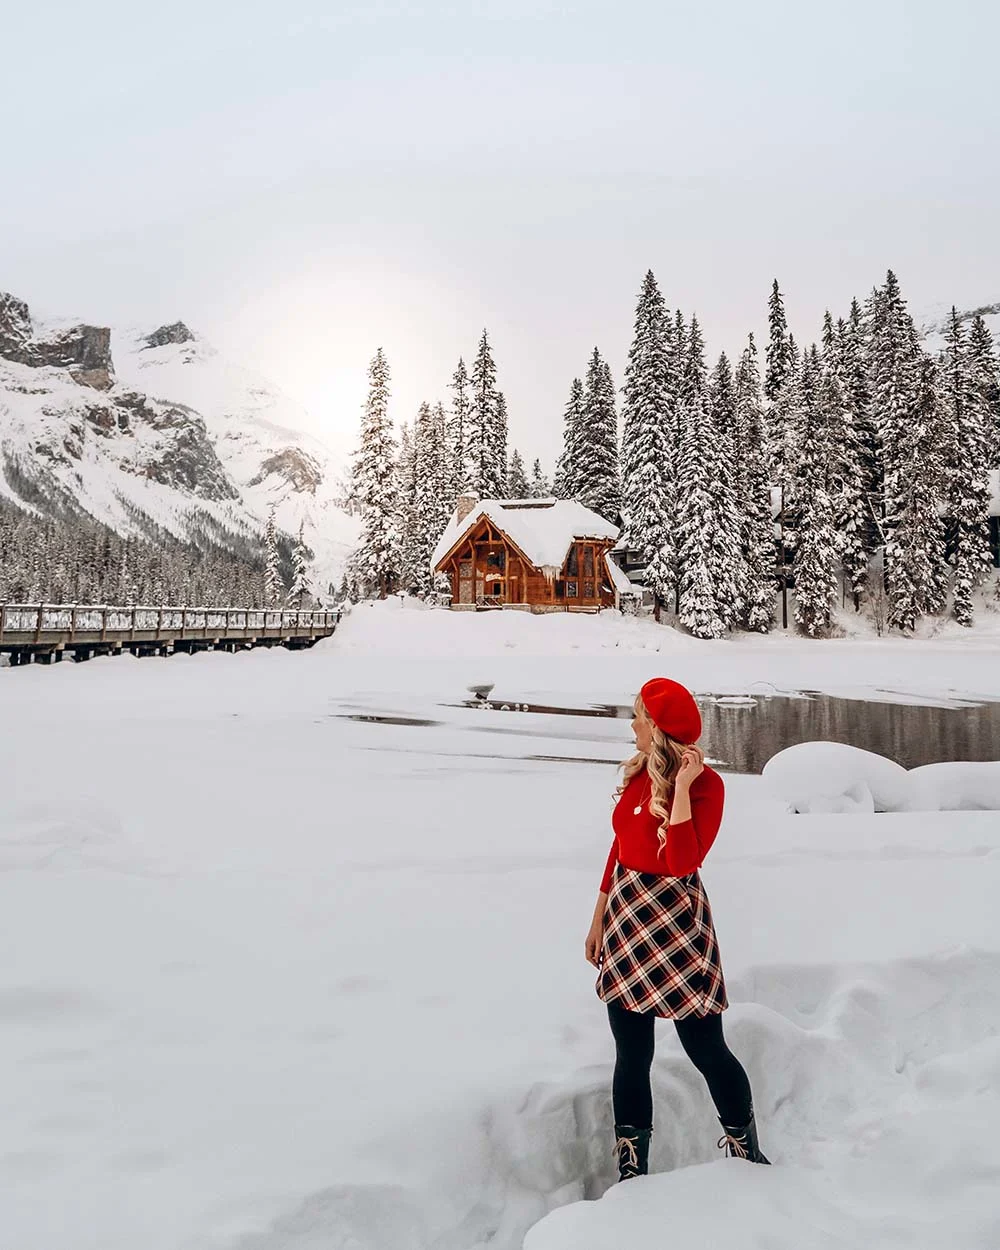 Banff is absolutely incredible. Although most people visit Banff when the weather is warmer, it's absolutely magical to visit in winter. Here's a local's guide to some of the best things to do in in Banff in winter. From hikes and trails to winter sports, family friendly excursions, dining experiences and more. You won't want to miss this guide that will surely convince you to add Banff in winter to your travel bucket list. Pictured here: Take a day trip to Emerald Lake